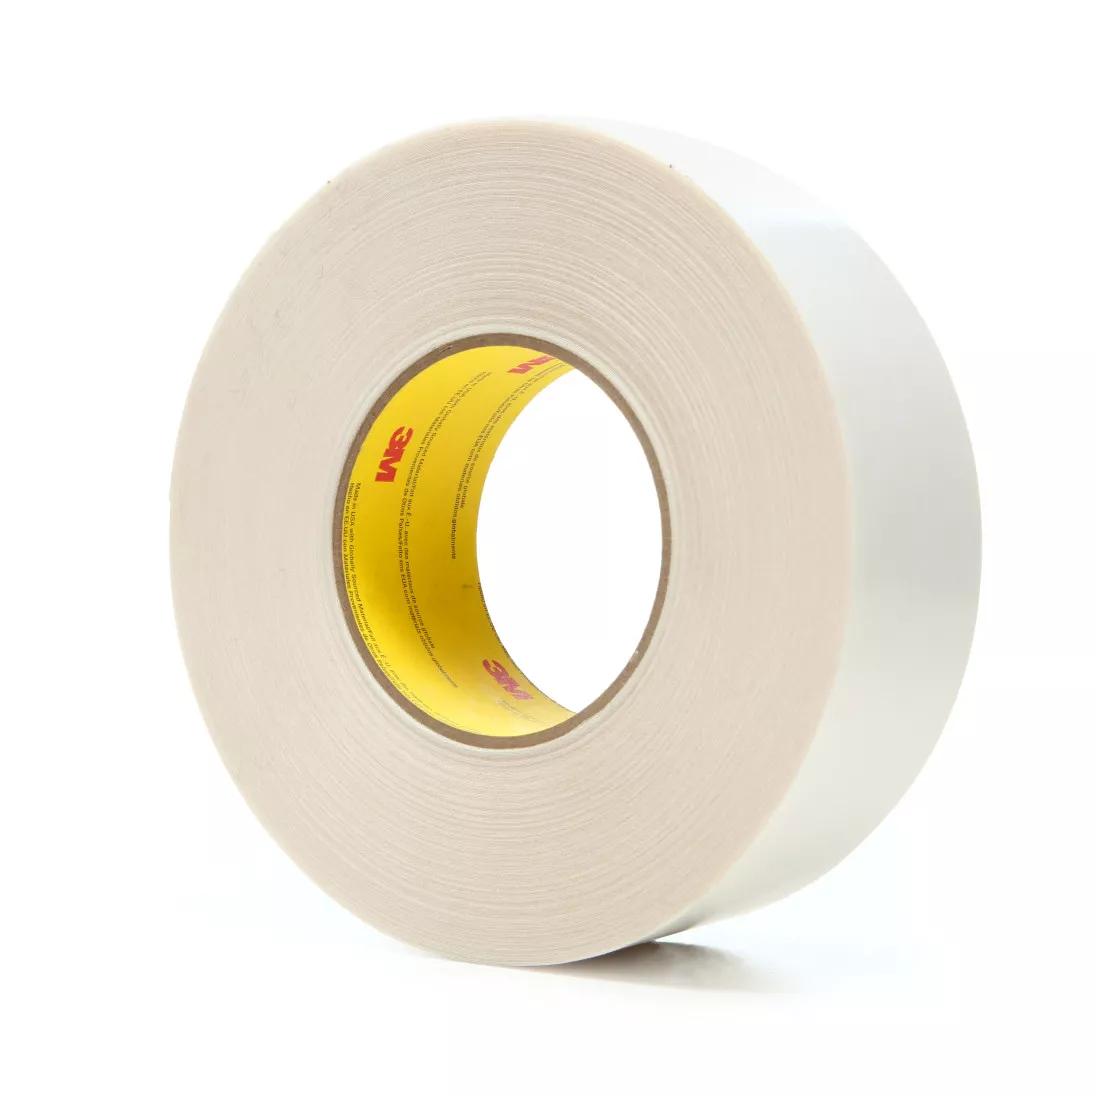 3M™ Double Coated Tape 9741, Clear, 48 mm x 55 m, 6.5 mil, 24 rolls per
case